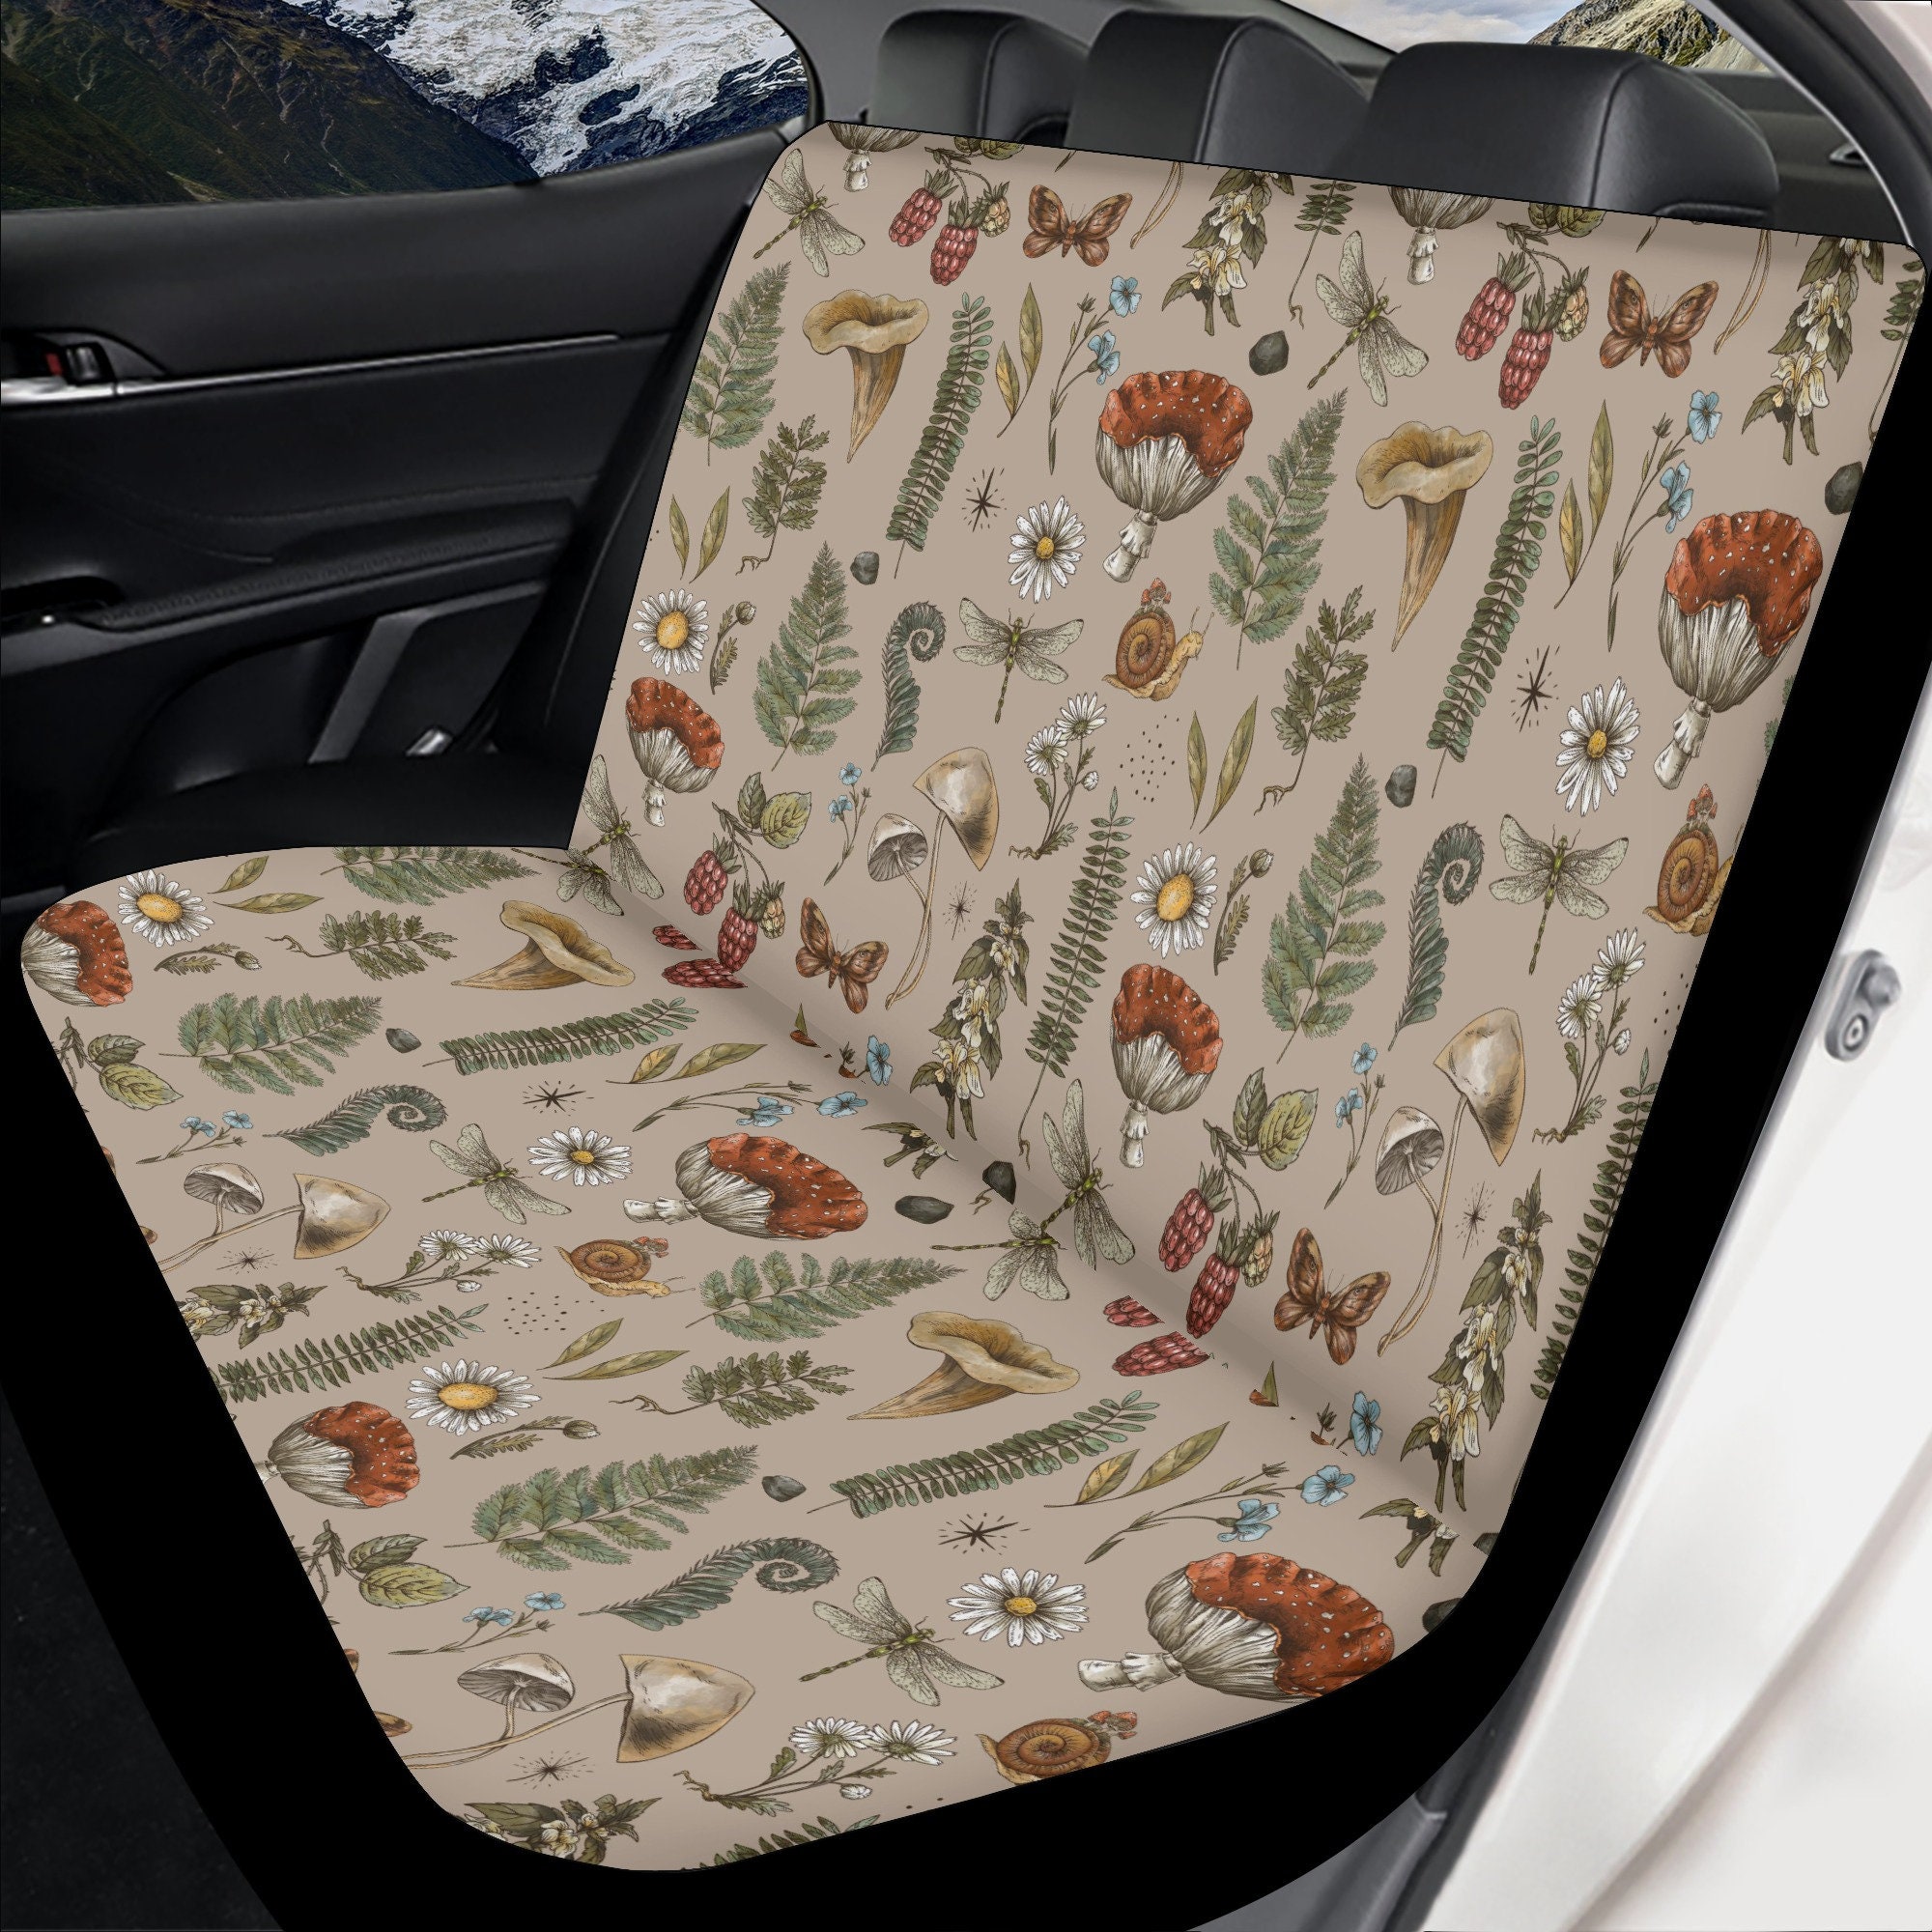 Discover Cottagecore Mushroom Car Seat Cover, Seat Covers for Car for Women, Beige Car Seat Covers for Vehicle, Aesthetic Car Gift